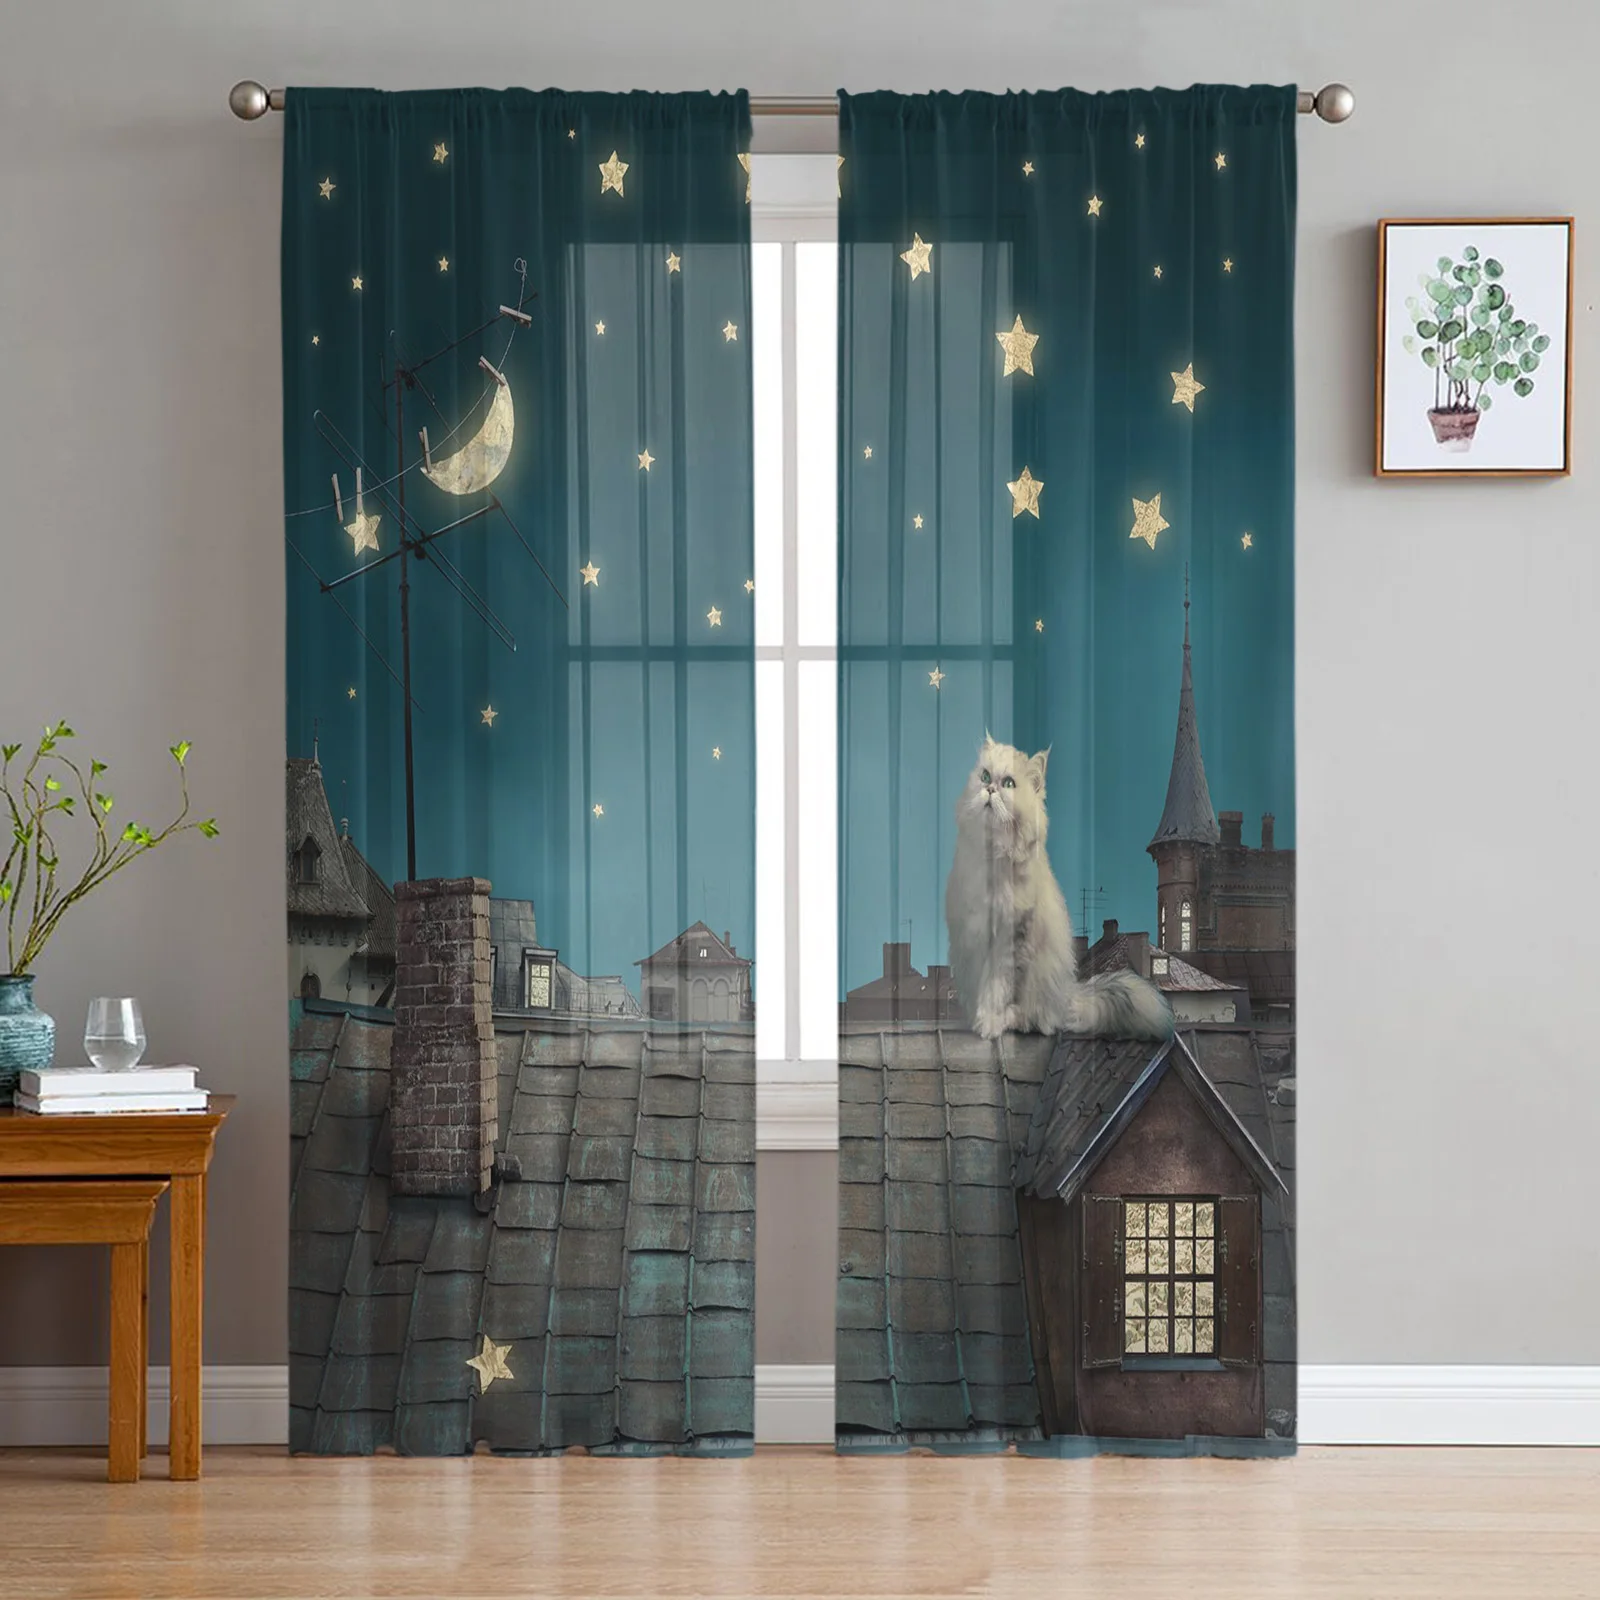 

Roof Kitten Night Moon Stars Tulle Curtains for Living Room Bedroom Decoration Transparent Chiffon Sheer Voile Window Curtain